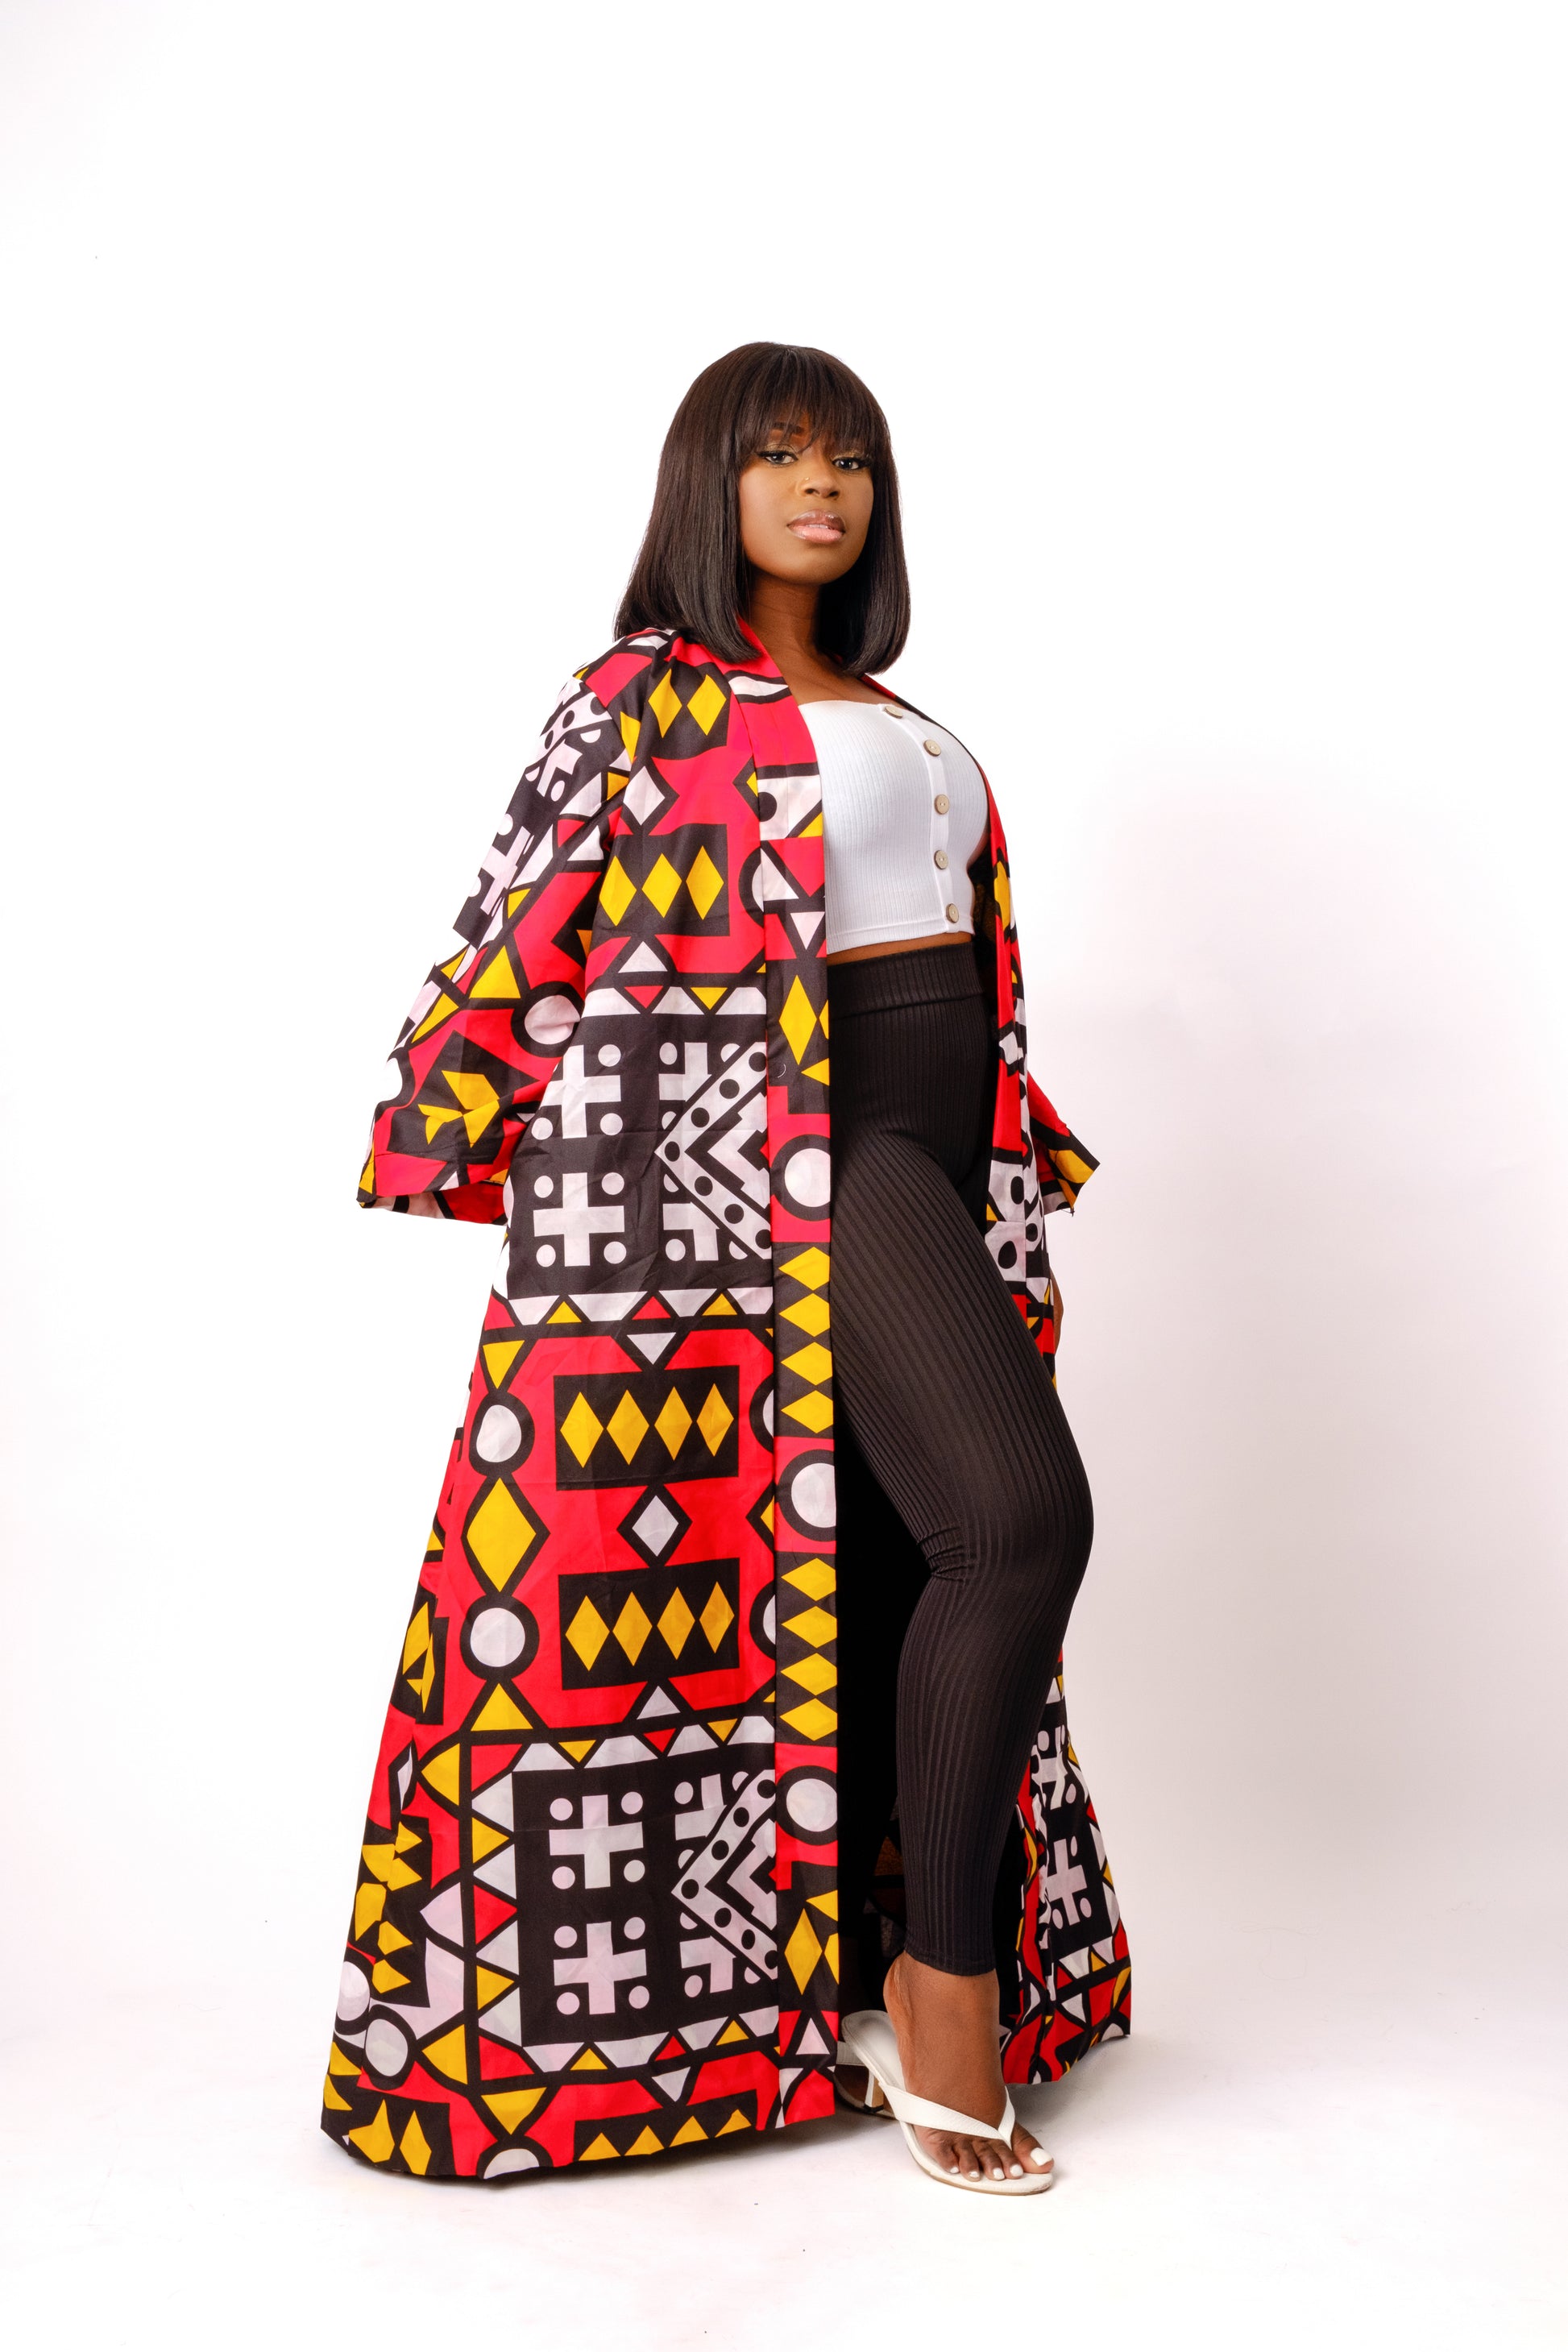 Red African print (Ankara) kimono made of a lightweight cotton material that features a mix of geometric tribal designs